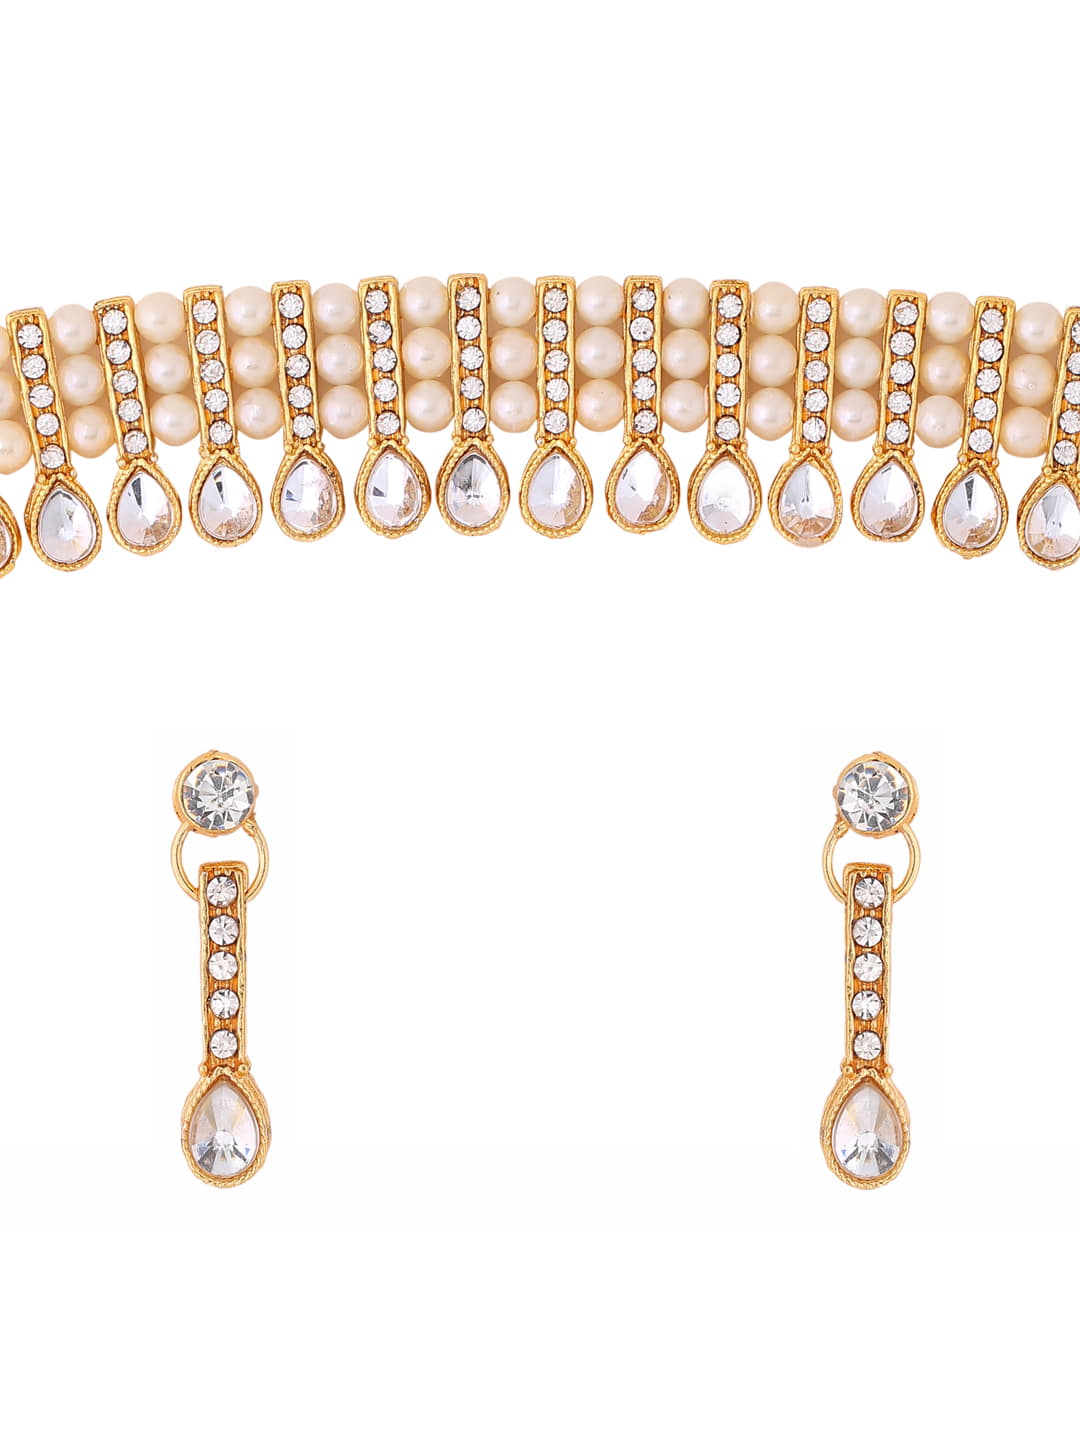 gold-plated-stone-studded-choker-necklace-set-viraasi